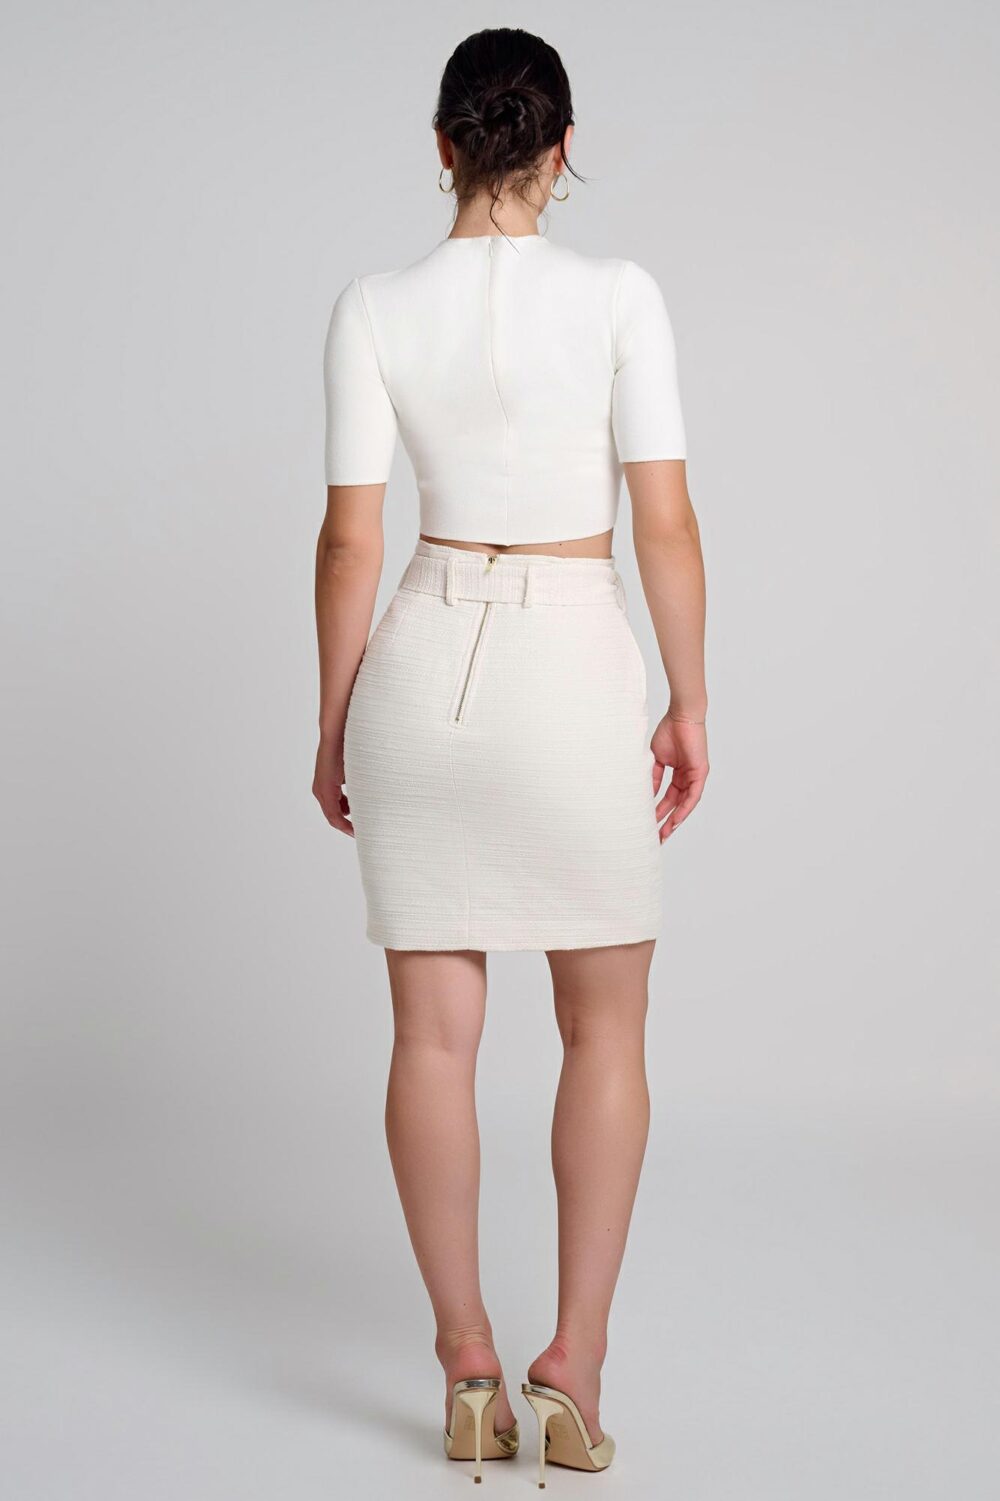 Ladies Skirt Colour is Ivory